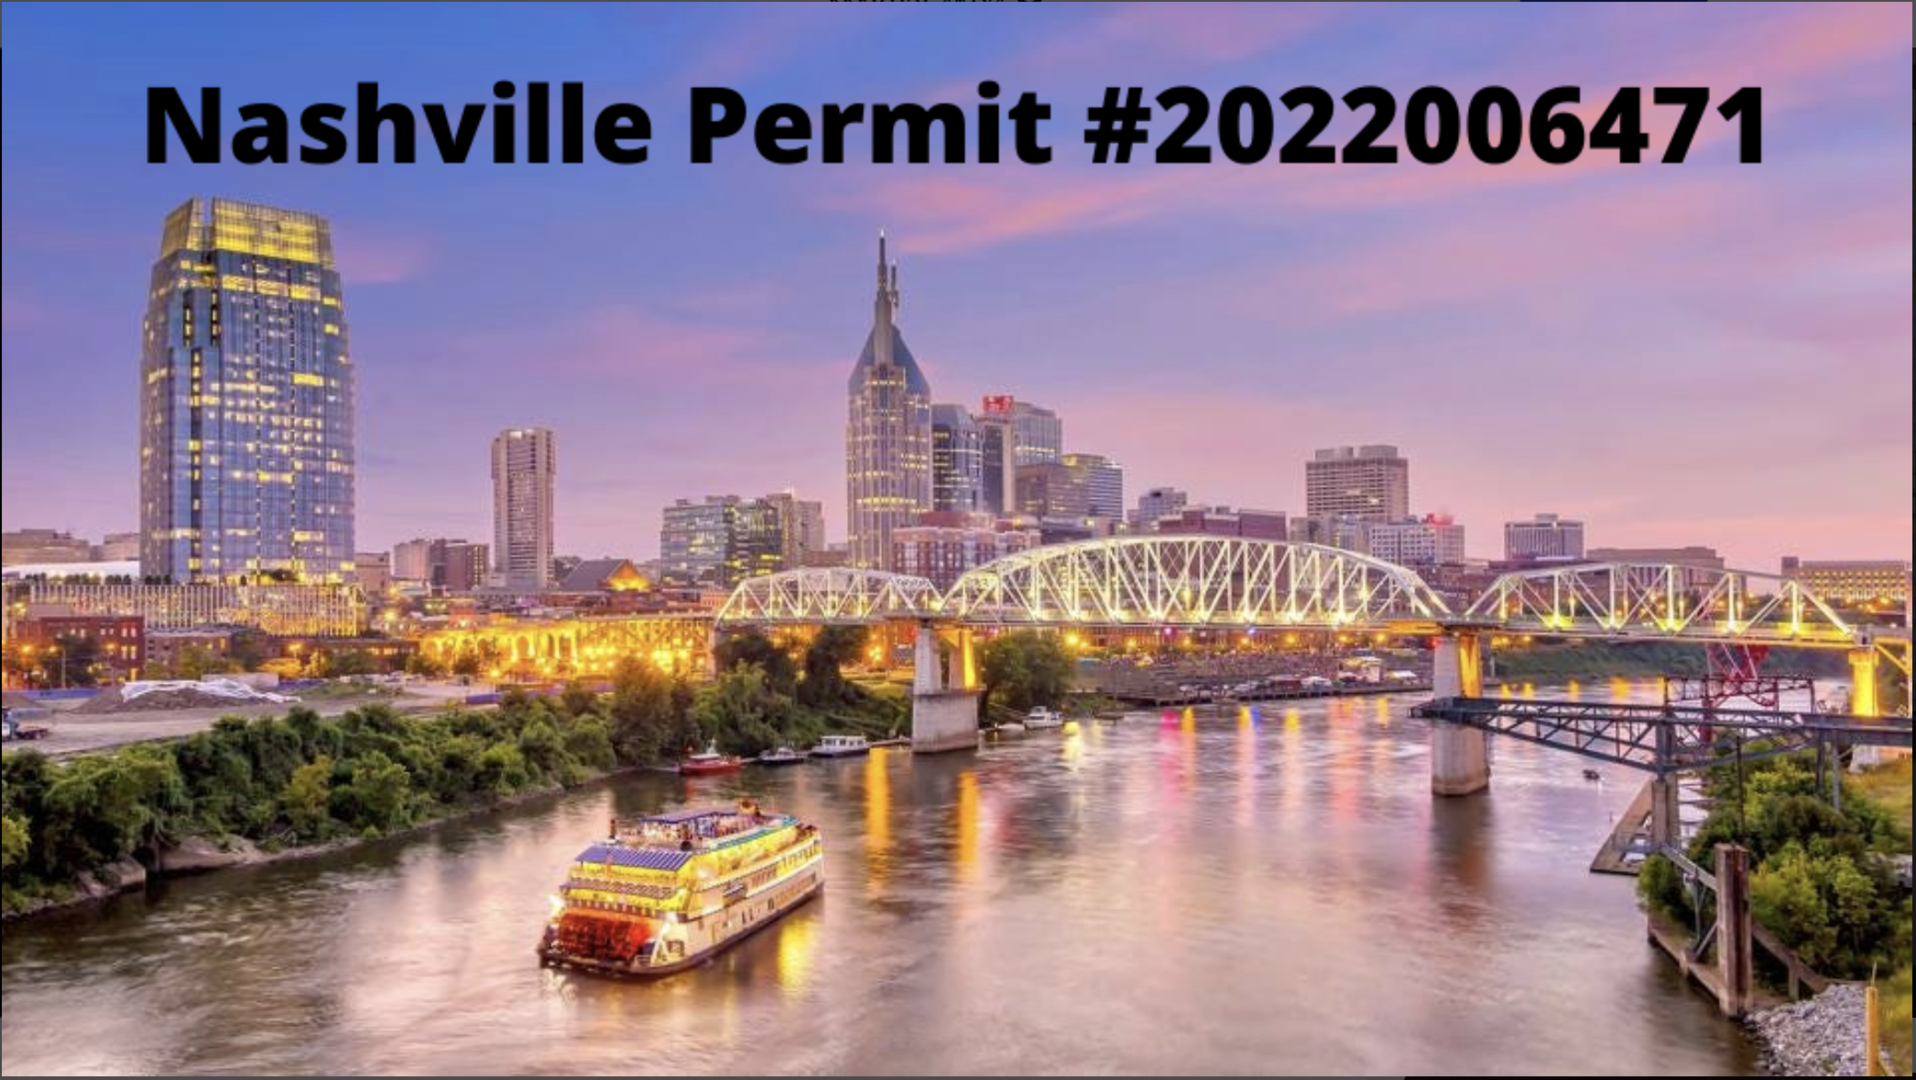 Nashville Permit for 3rd unit: issued in 2022 followed by:2022006471